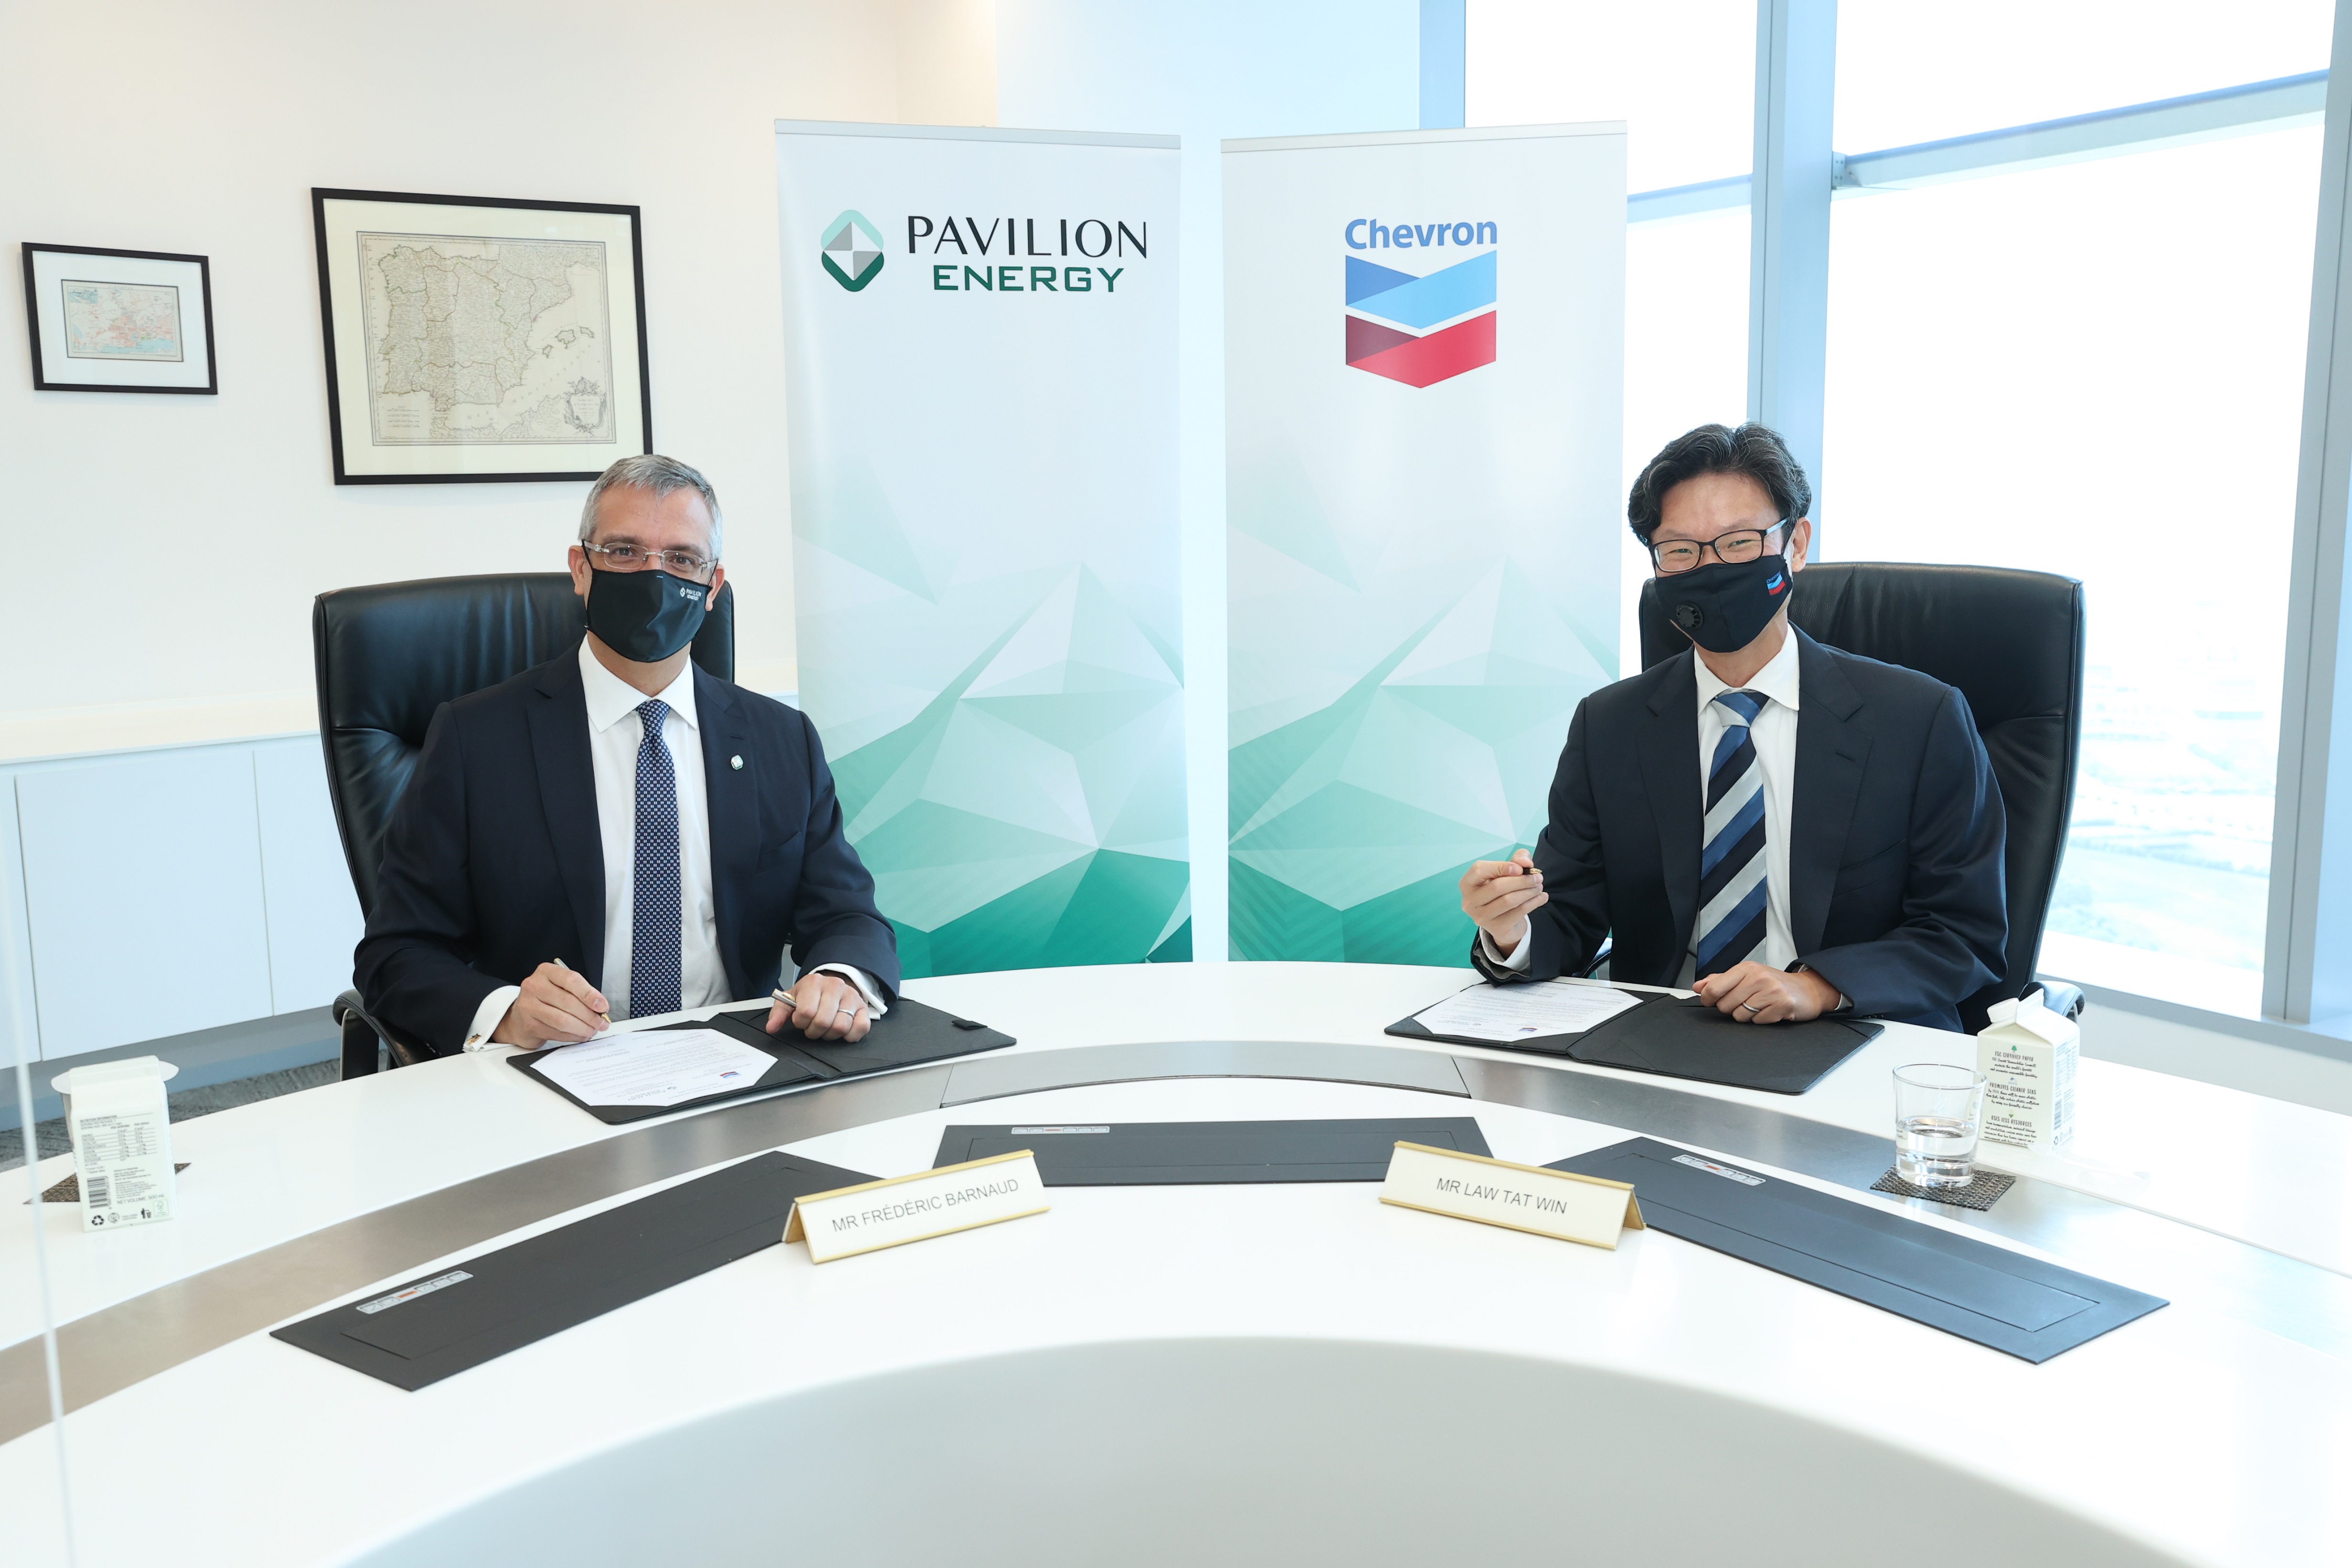 Pavilion Energy and Chevron have signed a six-year LNG sale and purchase agreement for the supply of approximately 0.5 million tonnes of LNG per year to Singapore from 2023. At the signing ceremony were Mr Frédéric H. Barnaud (left), Group CEO of Pavilion Energy, and Mr Law Tat Win (right), Chevron Singapore Country Chairman.